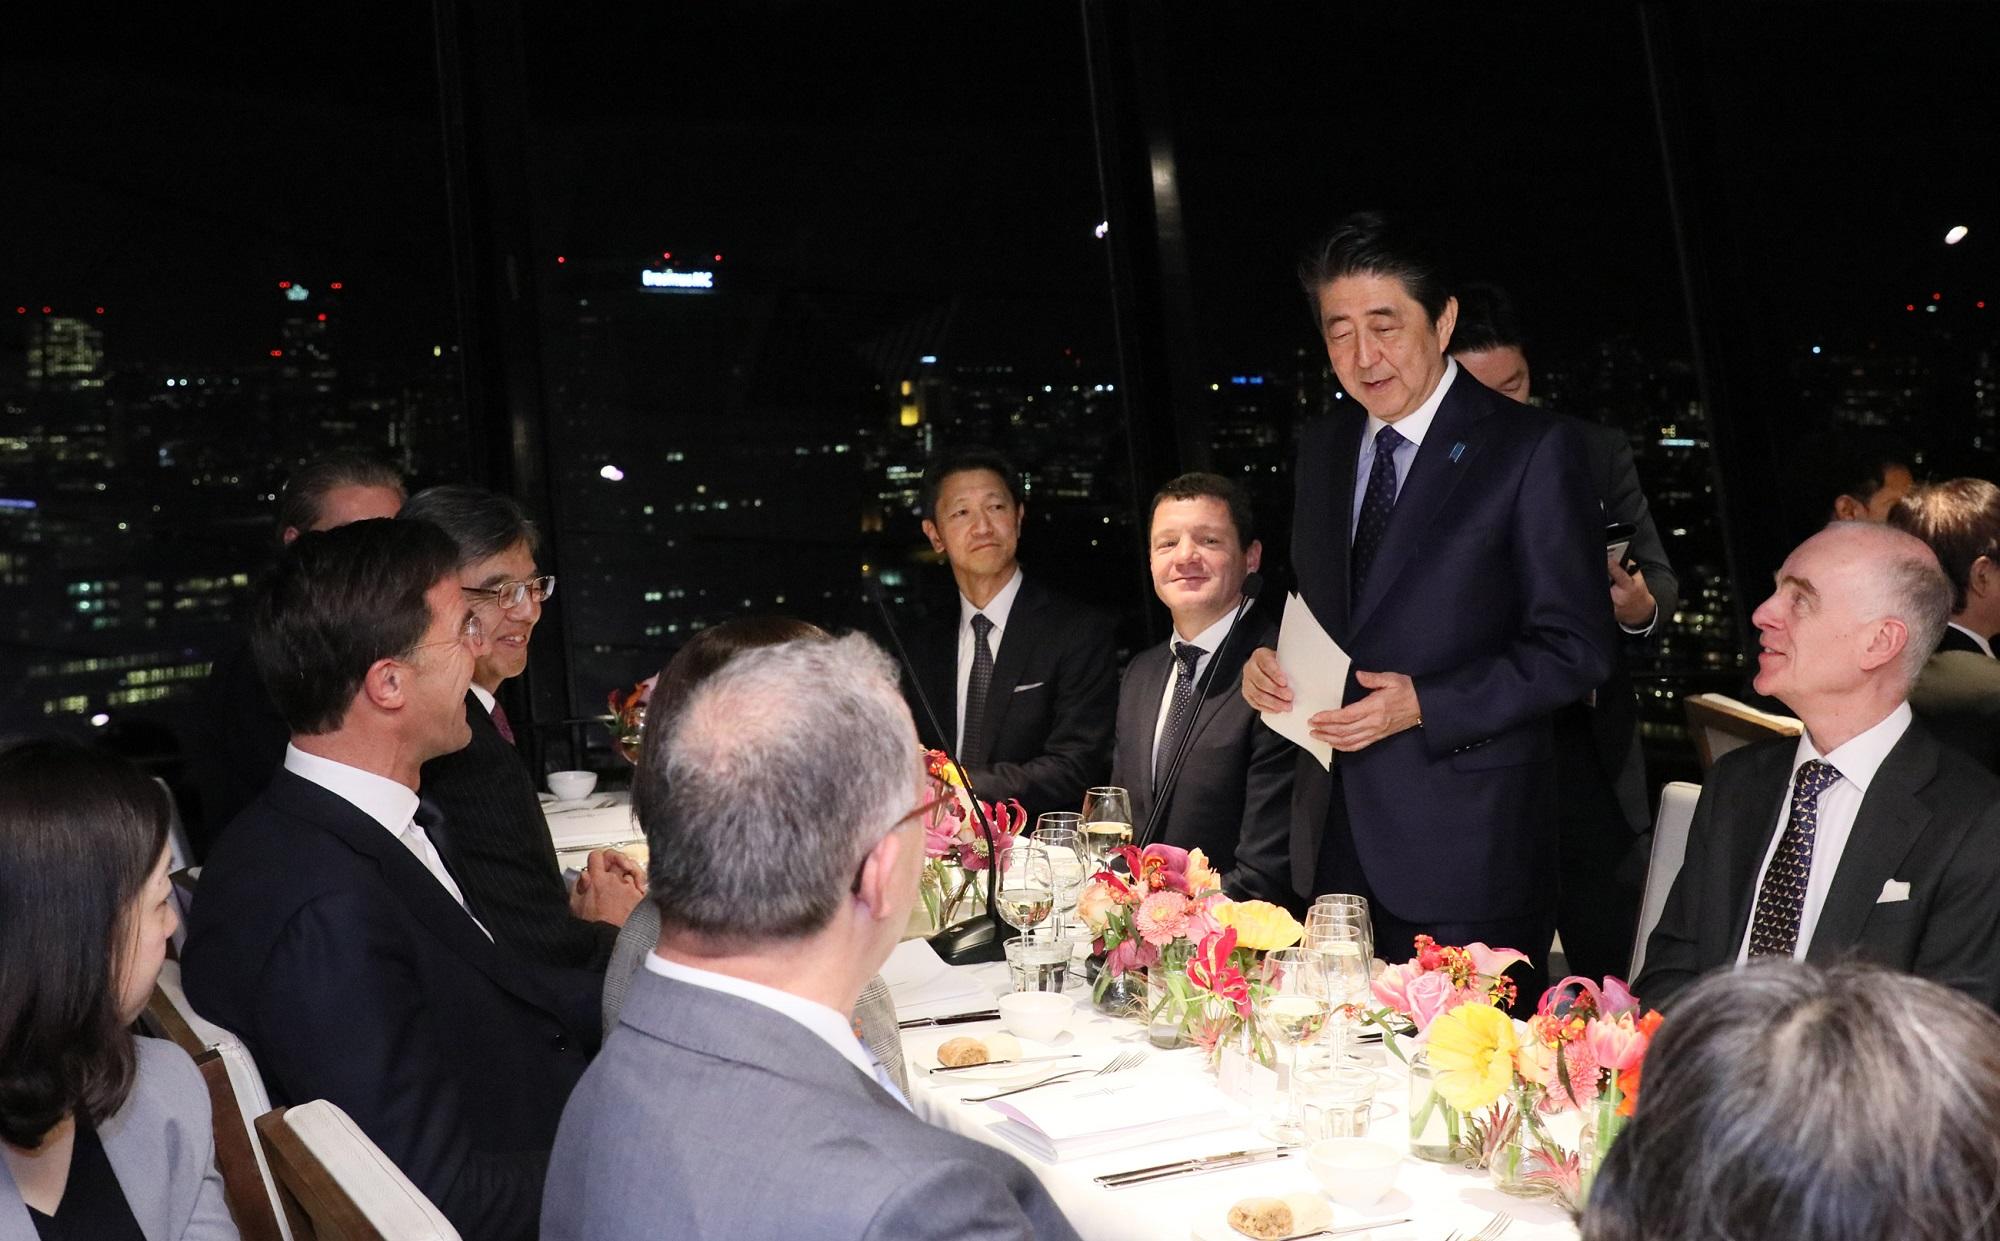 Photograph of the Prime Minister delivering an address at the dinner